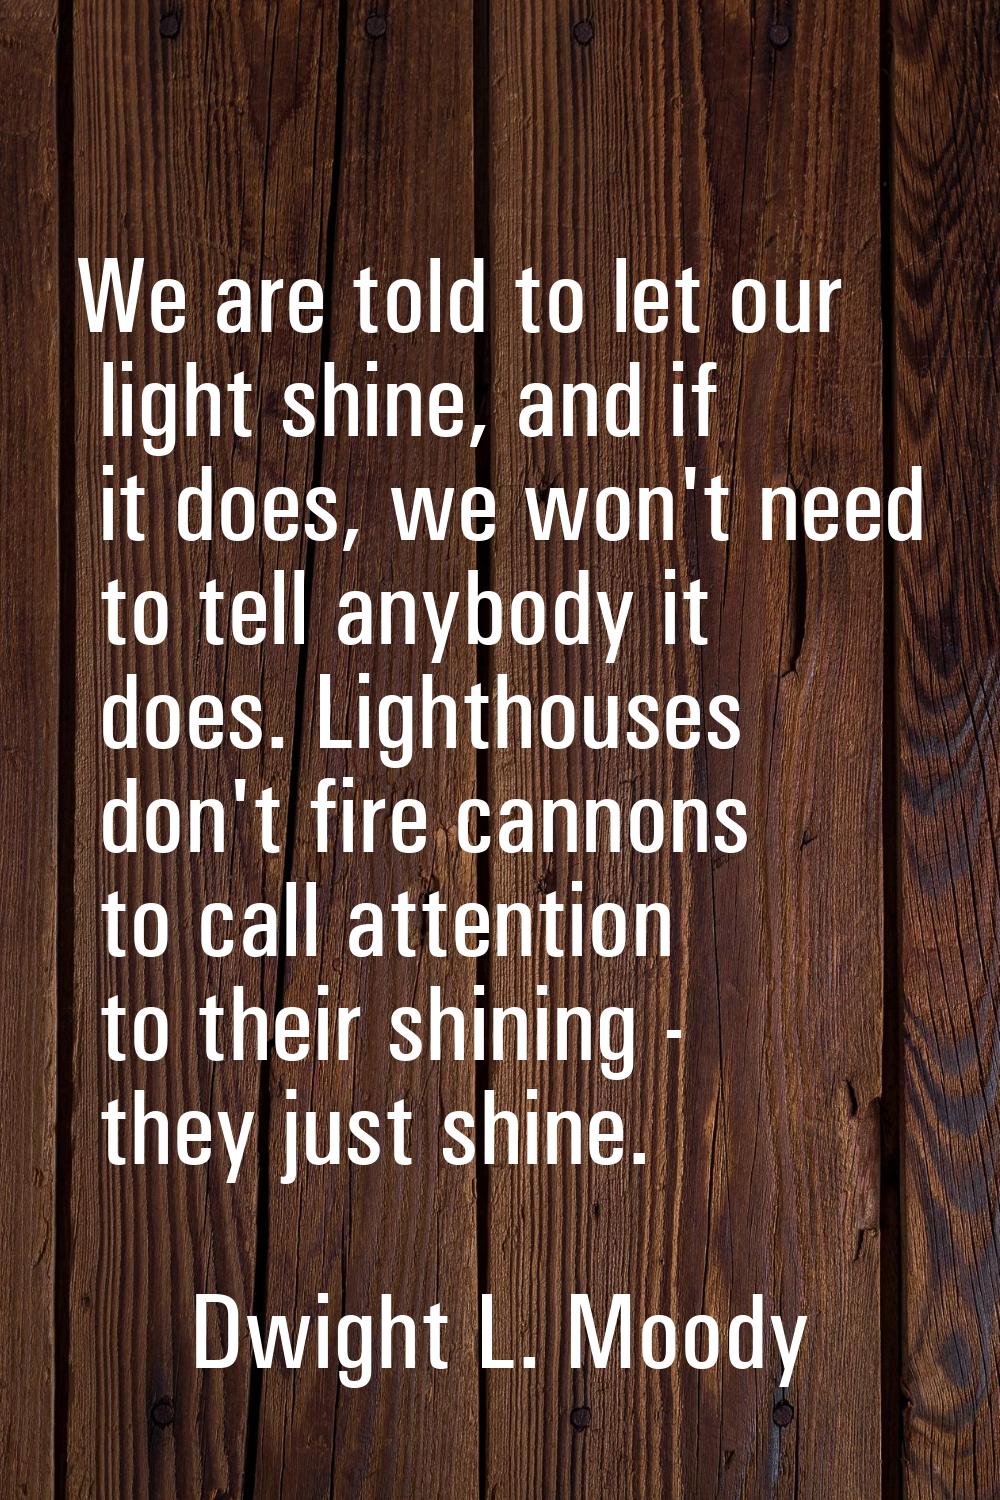 We are told to let our light shine, and if it does, we won't need to tell anybody it does. Lighthou